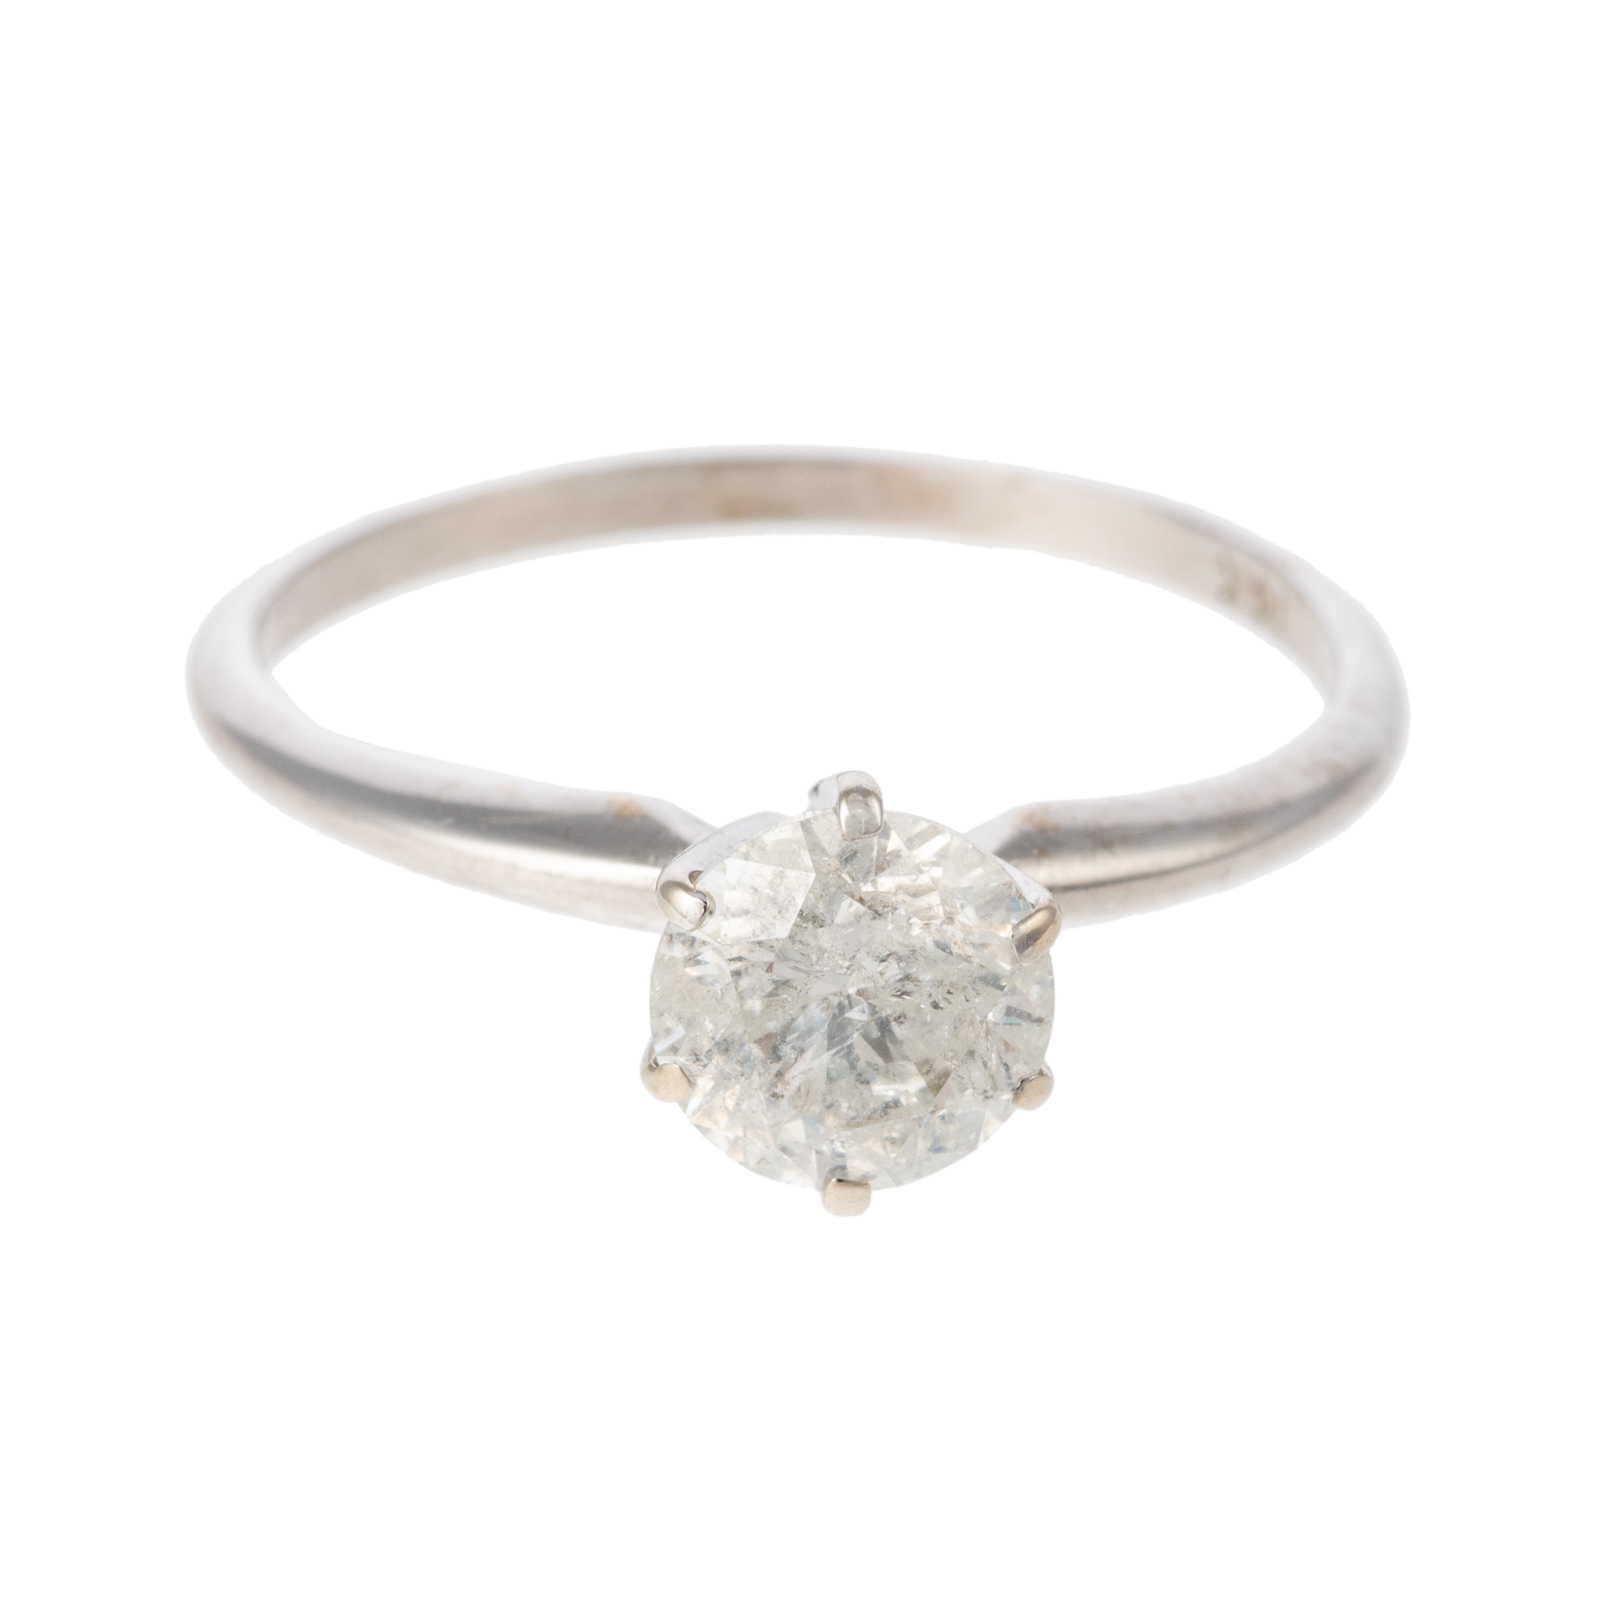 A 1.05 CT ROUND DIAMOND RING IN